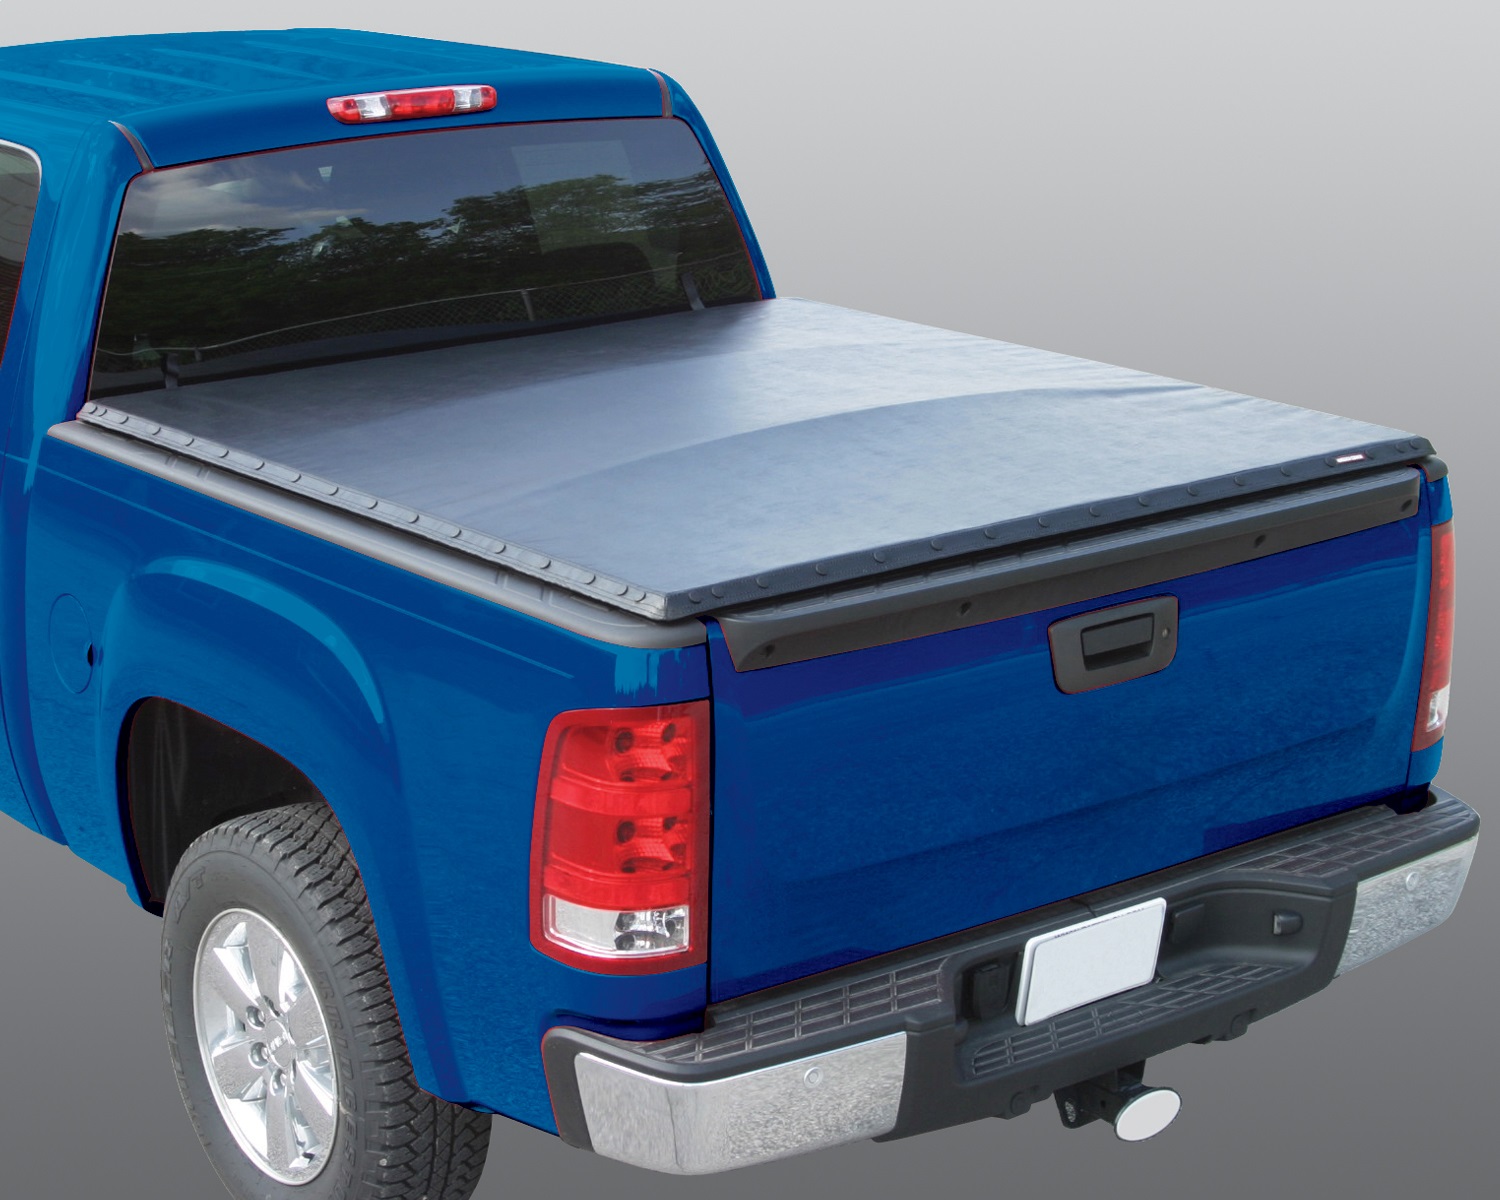 Rugged Liner Rugged Liner SN-NFK605 Rugged Cover; Tonneau Cover Fits 05-13 Equator Frontier